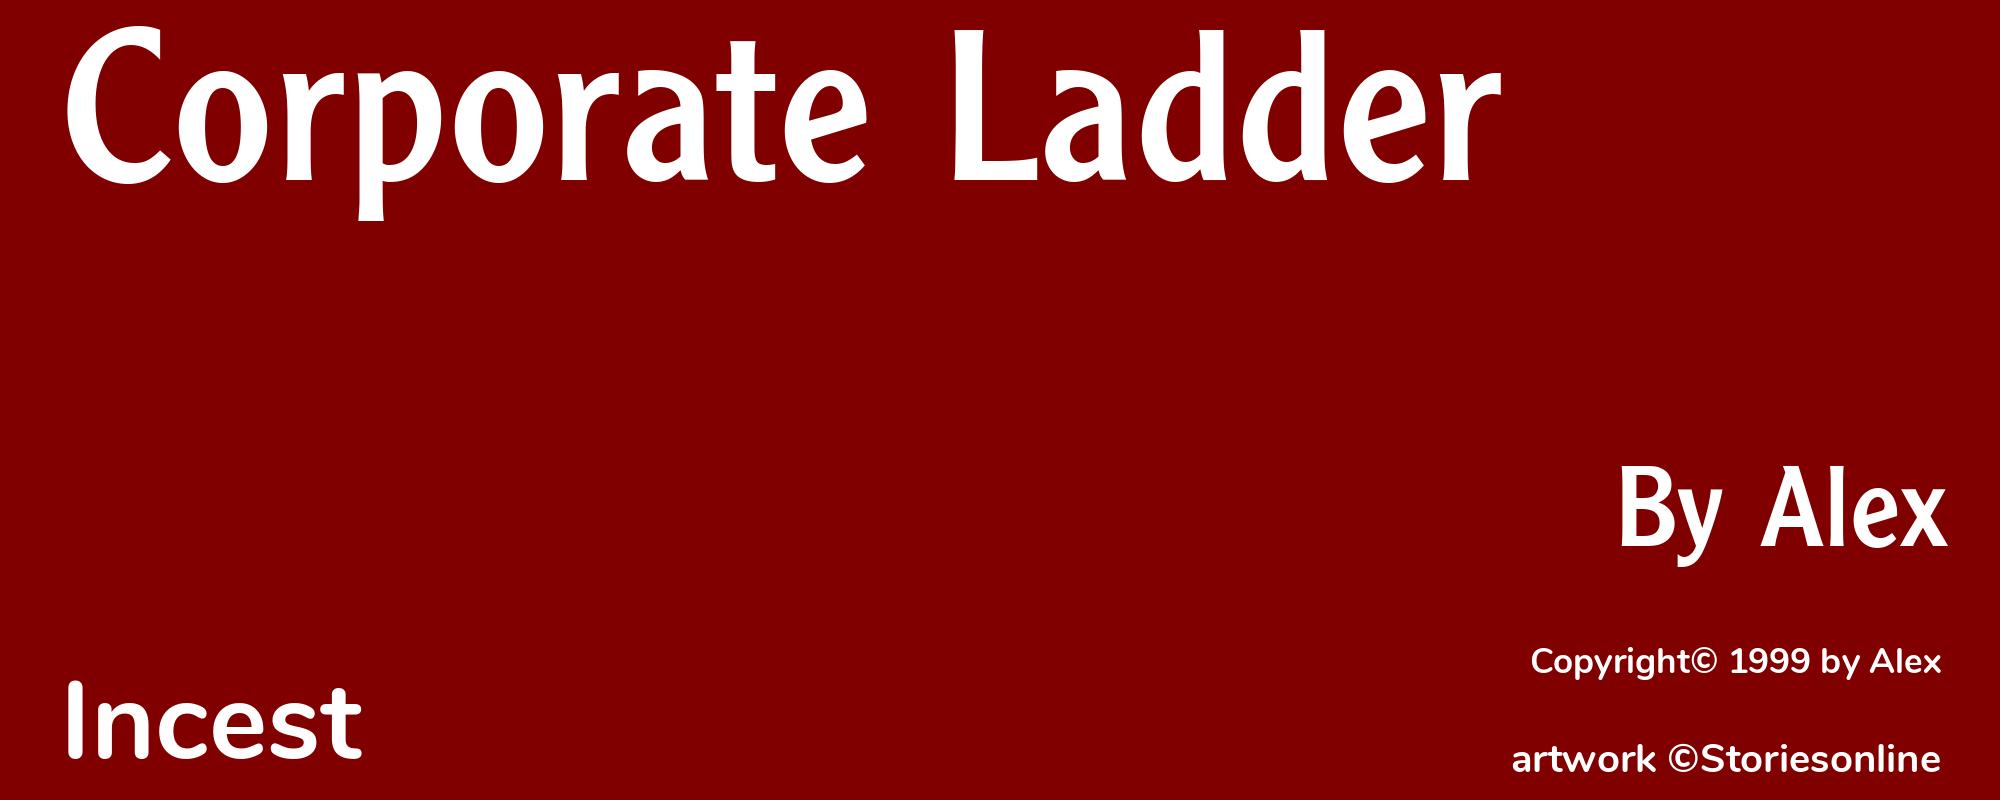 Corporate Ladder - Cover